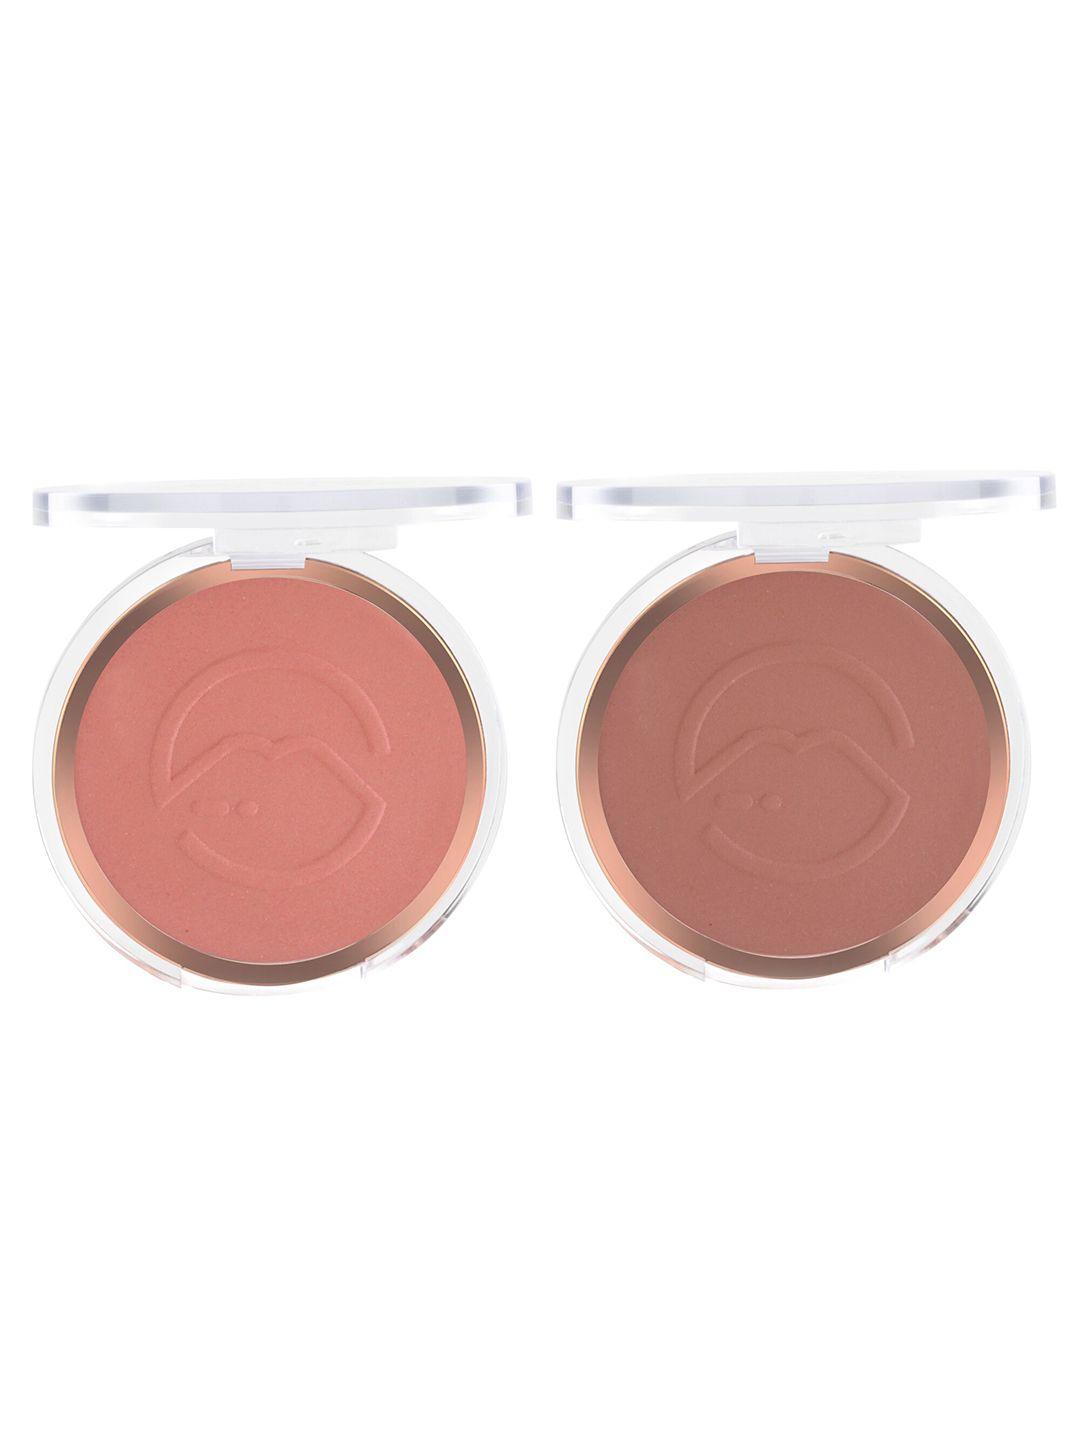 mars-set-of-2-flush-of-love-highly-pigmented-matte-face-blusher---shade-02-&-01